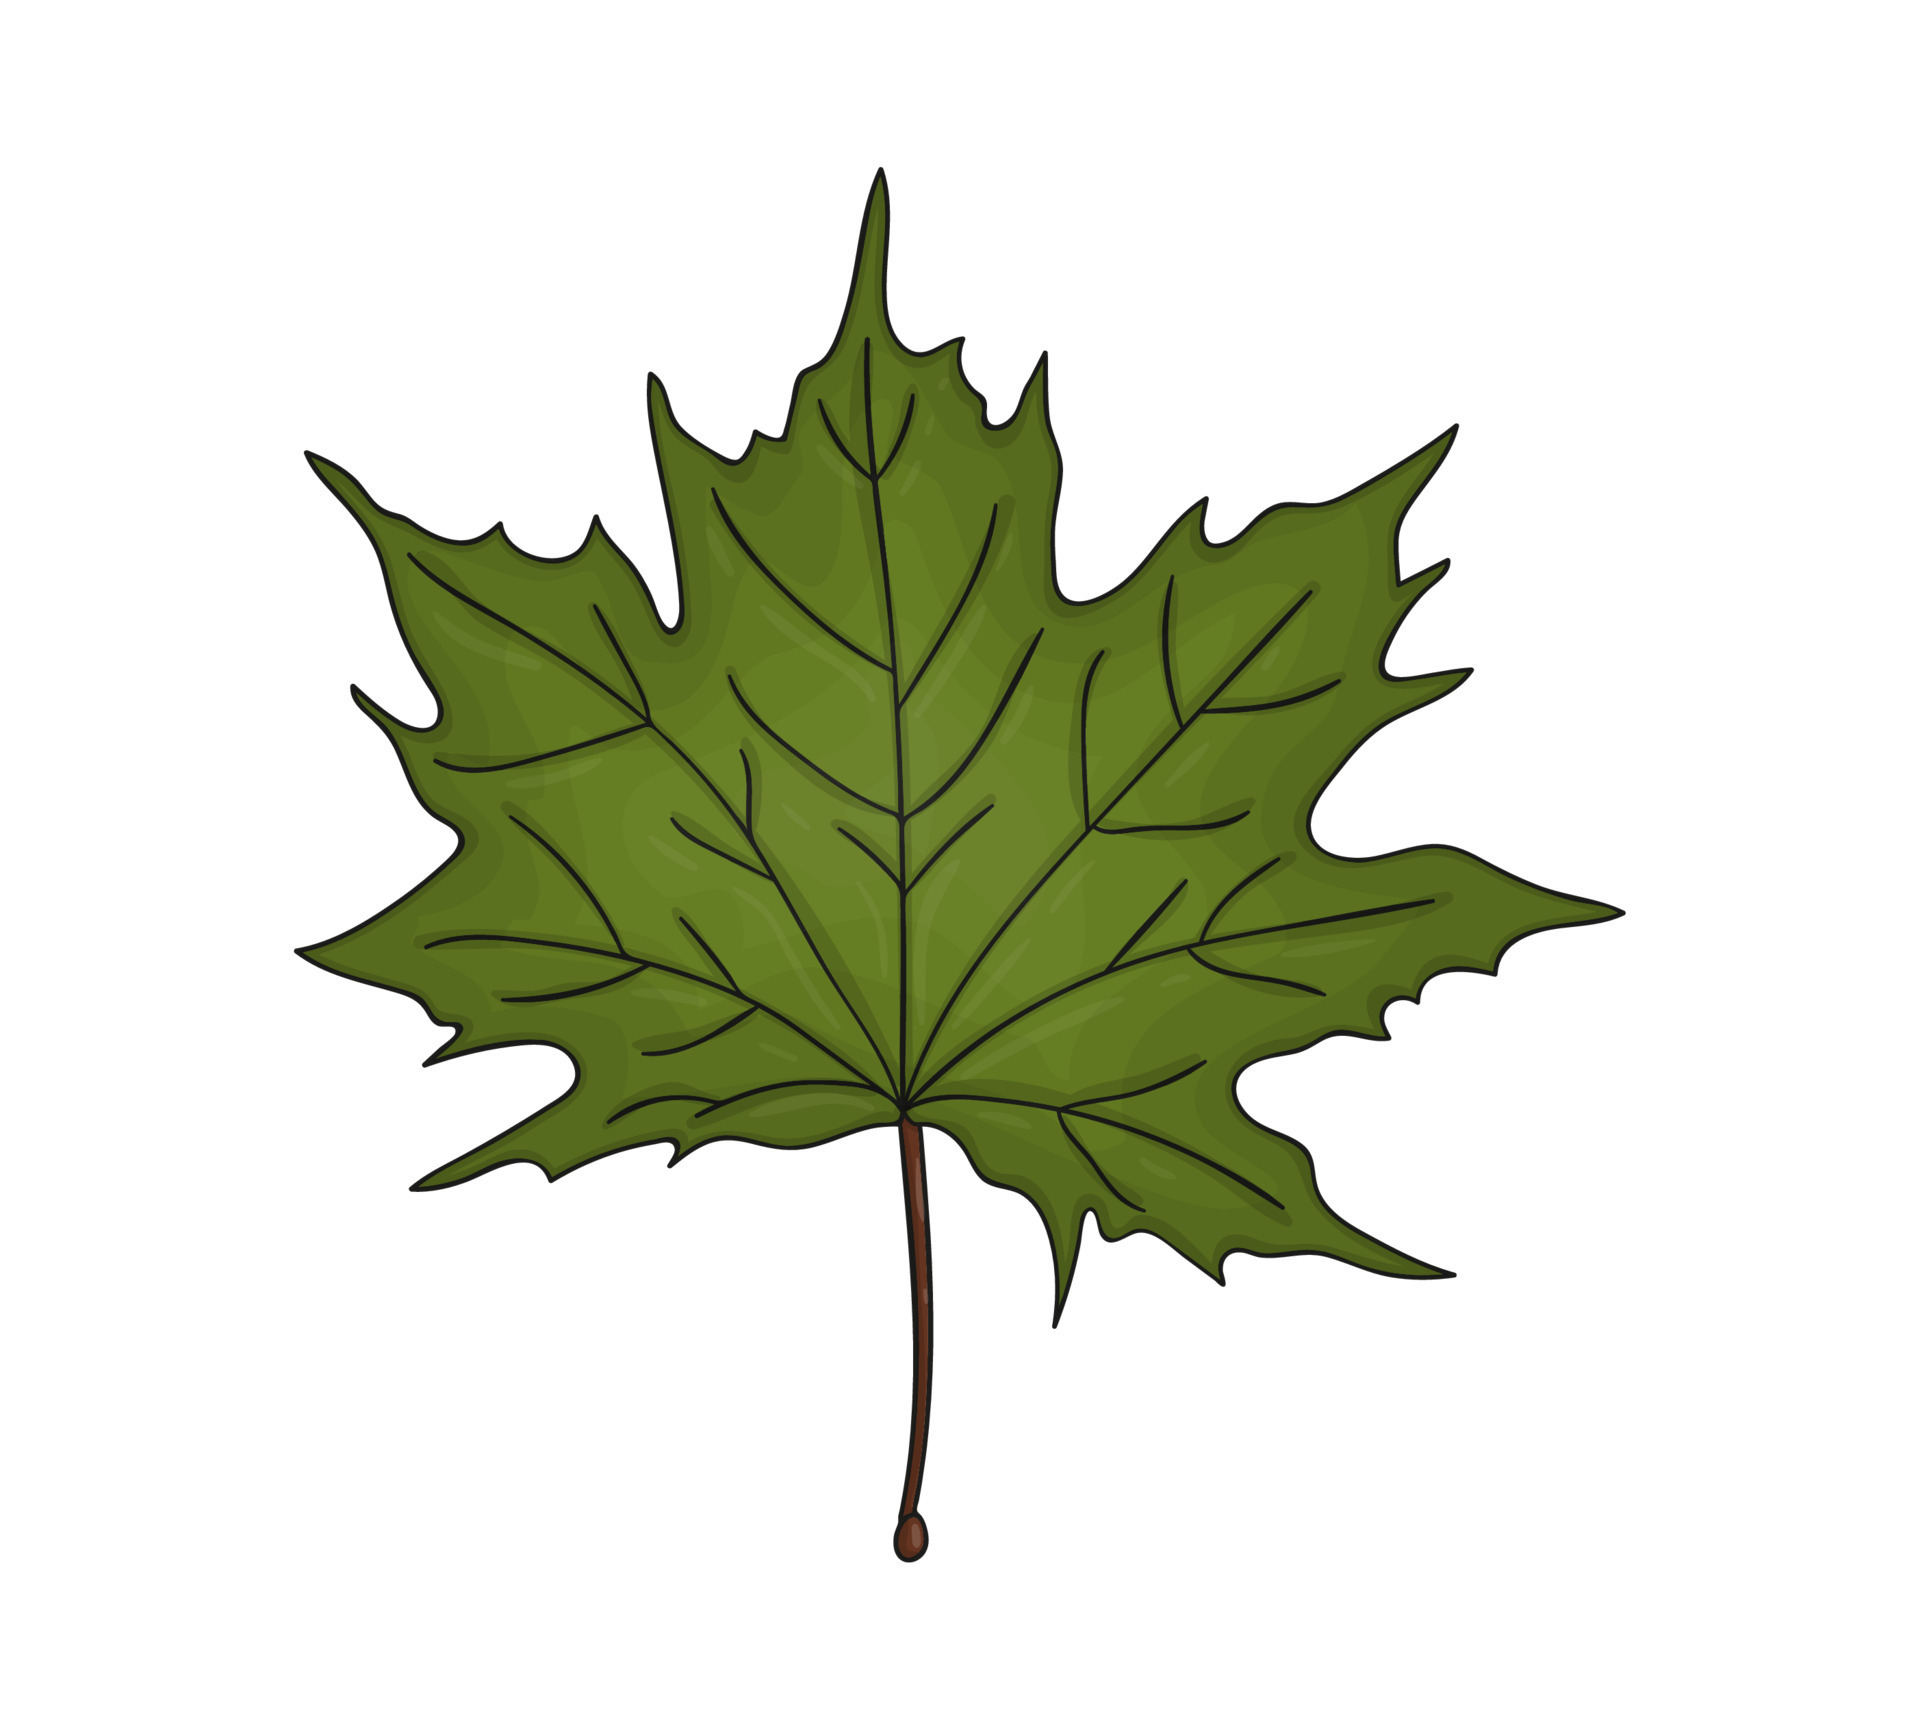 Green Leaves PNG Image  Maple leaf pictures, Leaf images, Maple